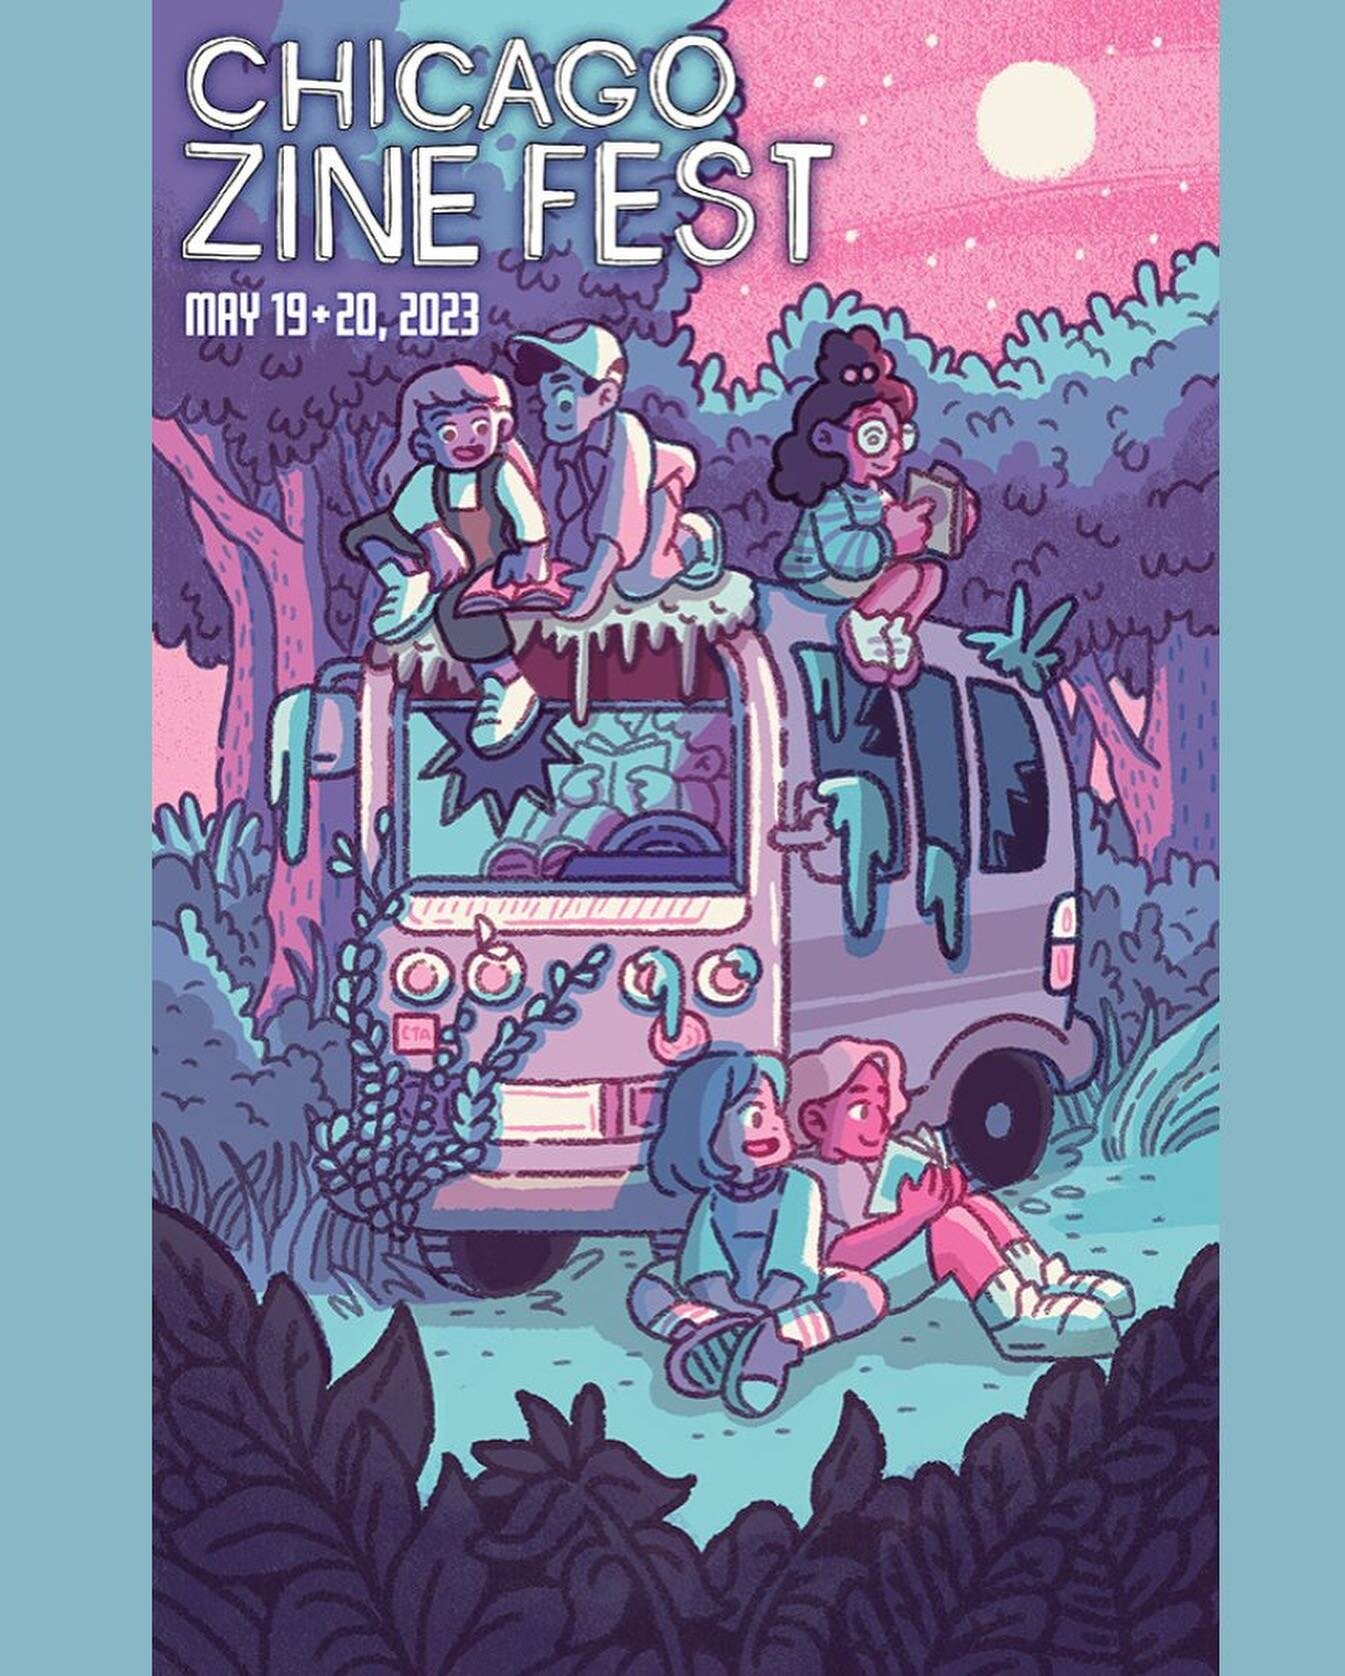 That Gray Zine will be at Chicago Zine Fest on Saturday, May 20th, from 11am-6pm at Plumbers Union Hall!! Over 100 zinesters will be selling, trading, and displaying their self-published zines! I&rsquo;m so excited to explore and discover more zines 